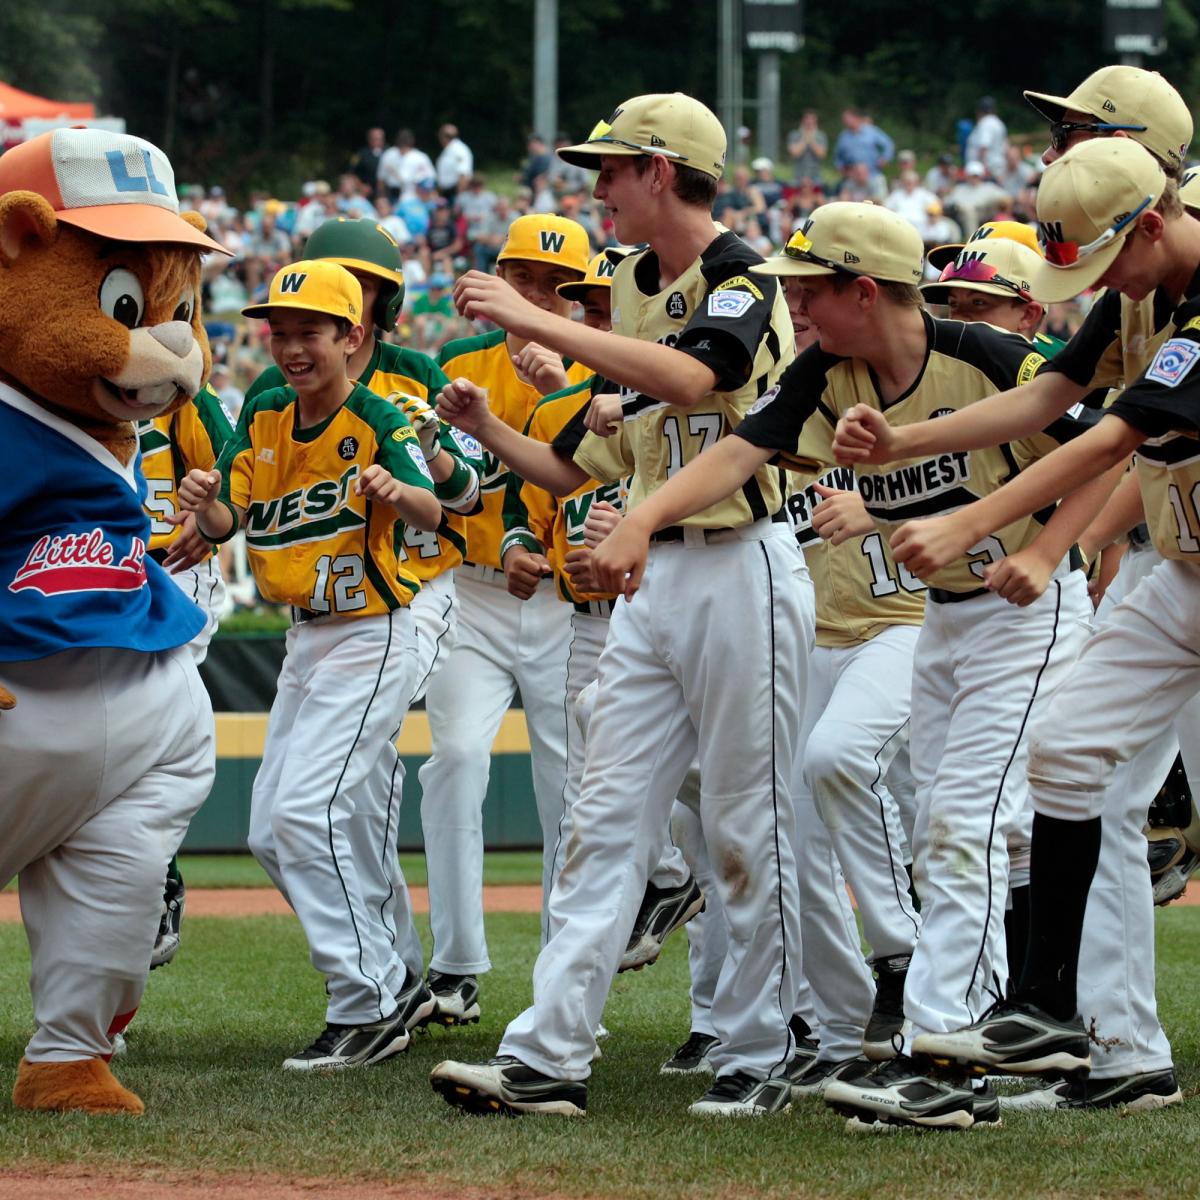 Little League World Series 2012 Teams in MustWin Situations on Day 2